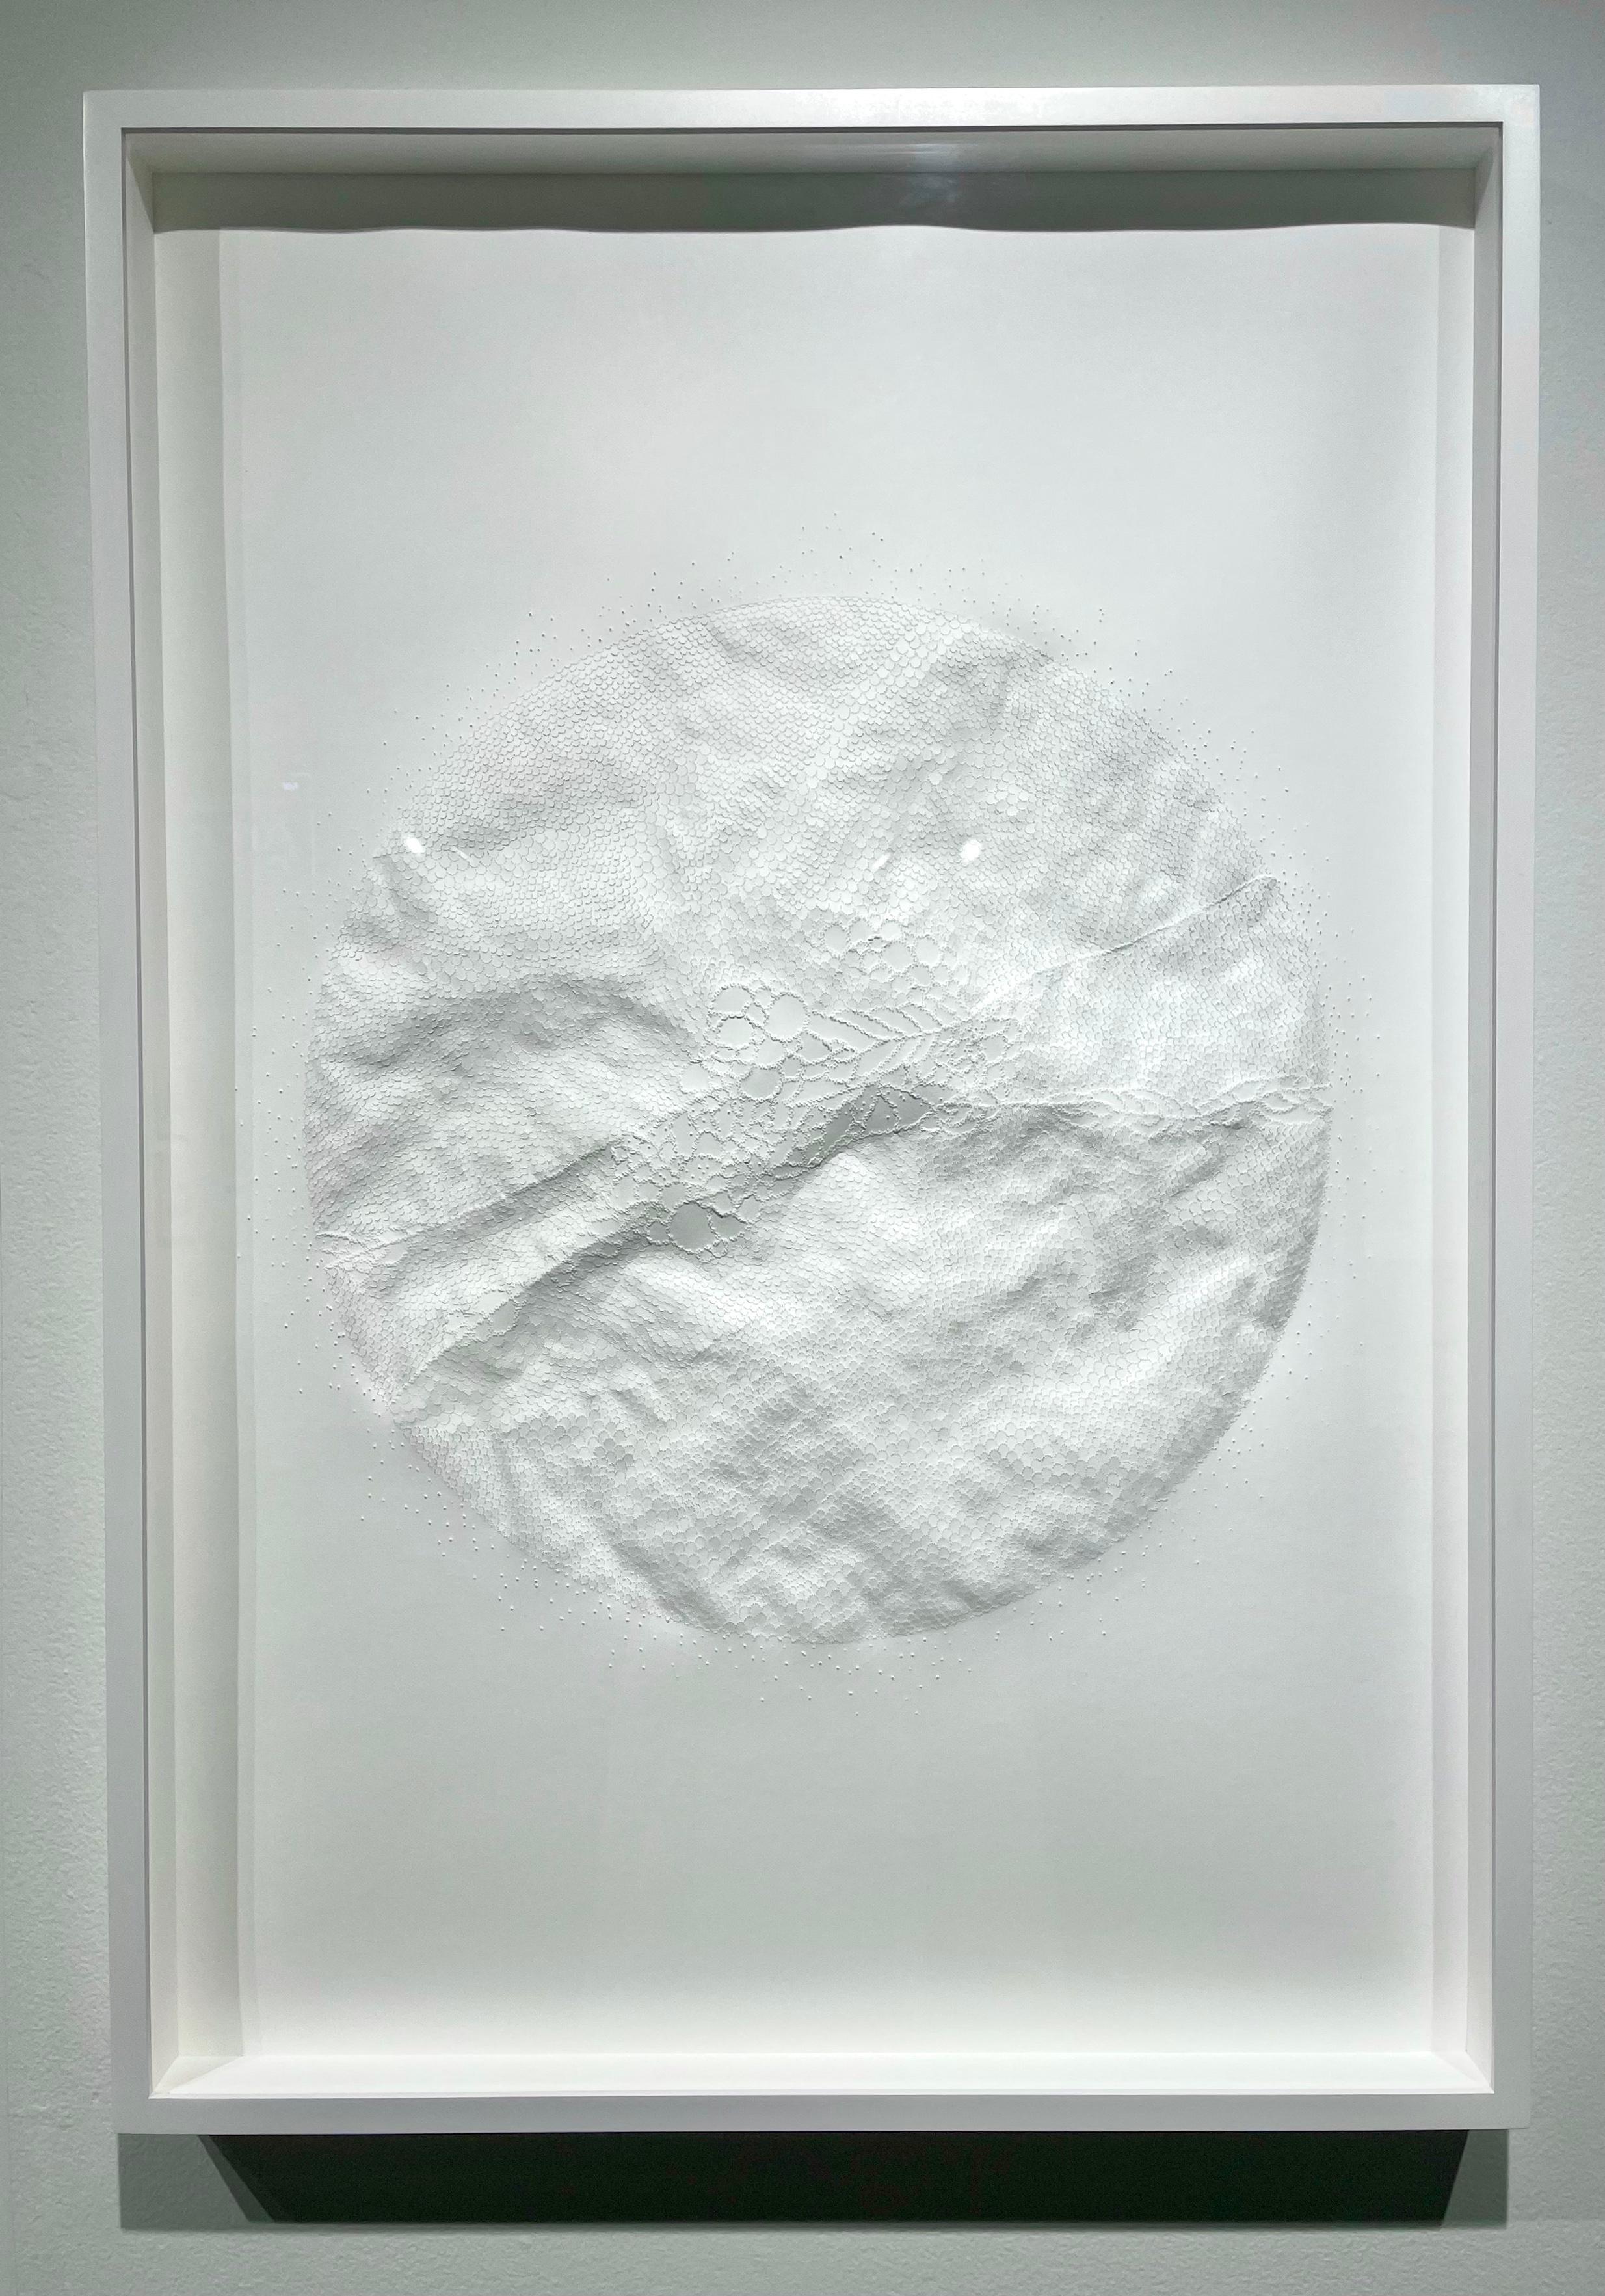 EC 16 - textural abstract circle shape nature inspired white sculpted paper - Abstract Sculpture by Anne-Charlotte Saliba